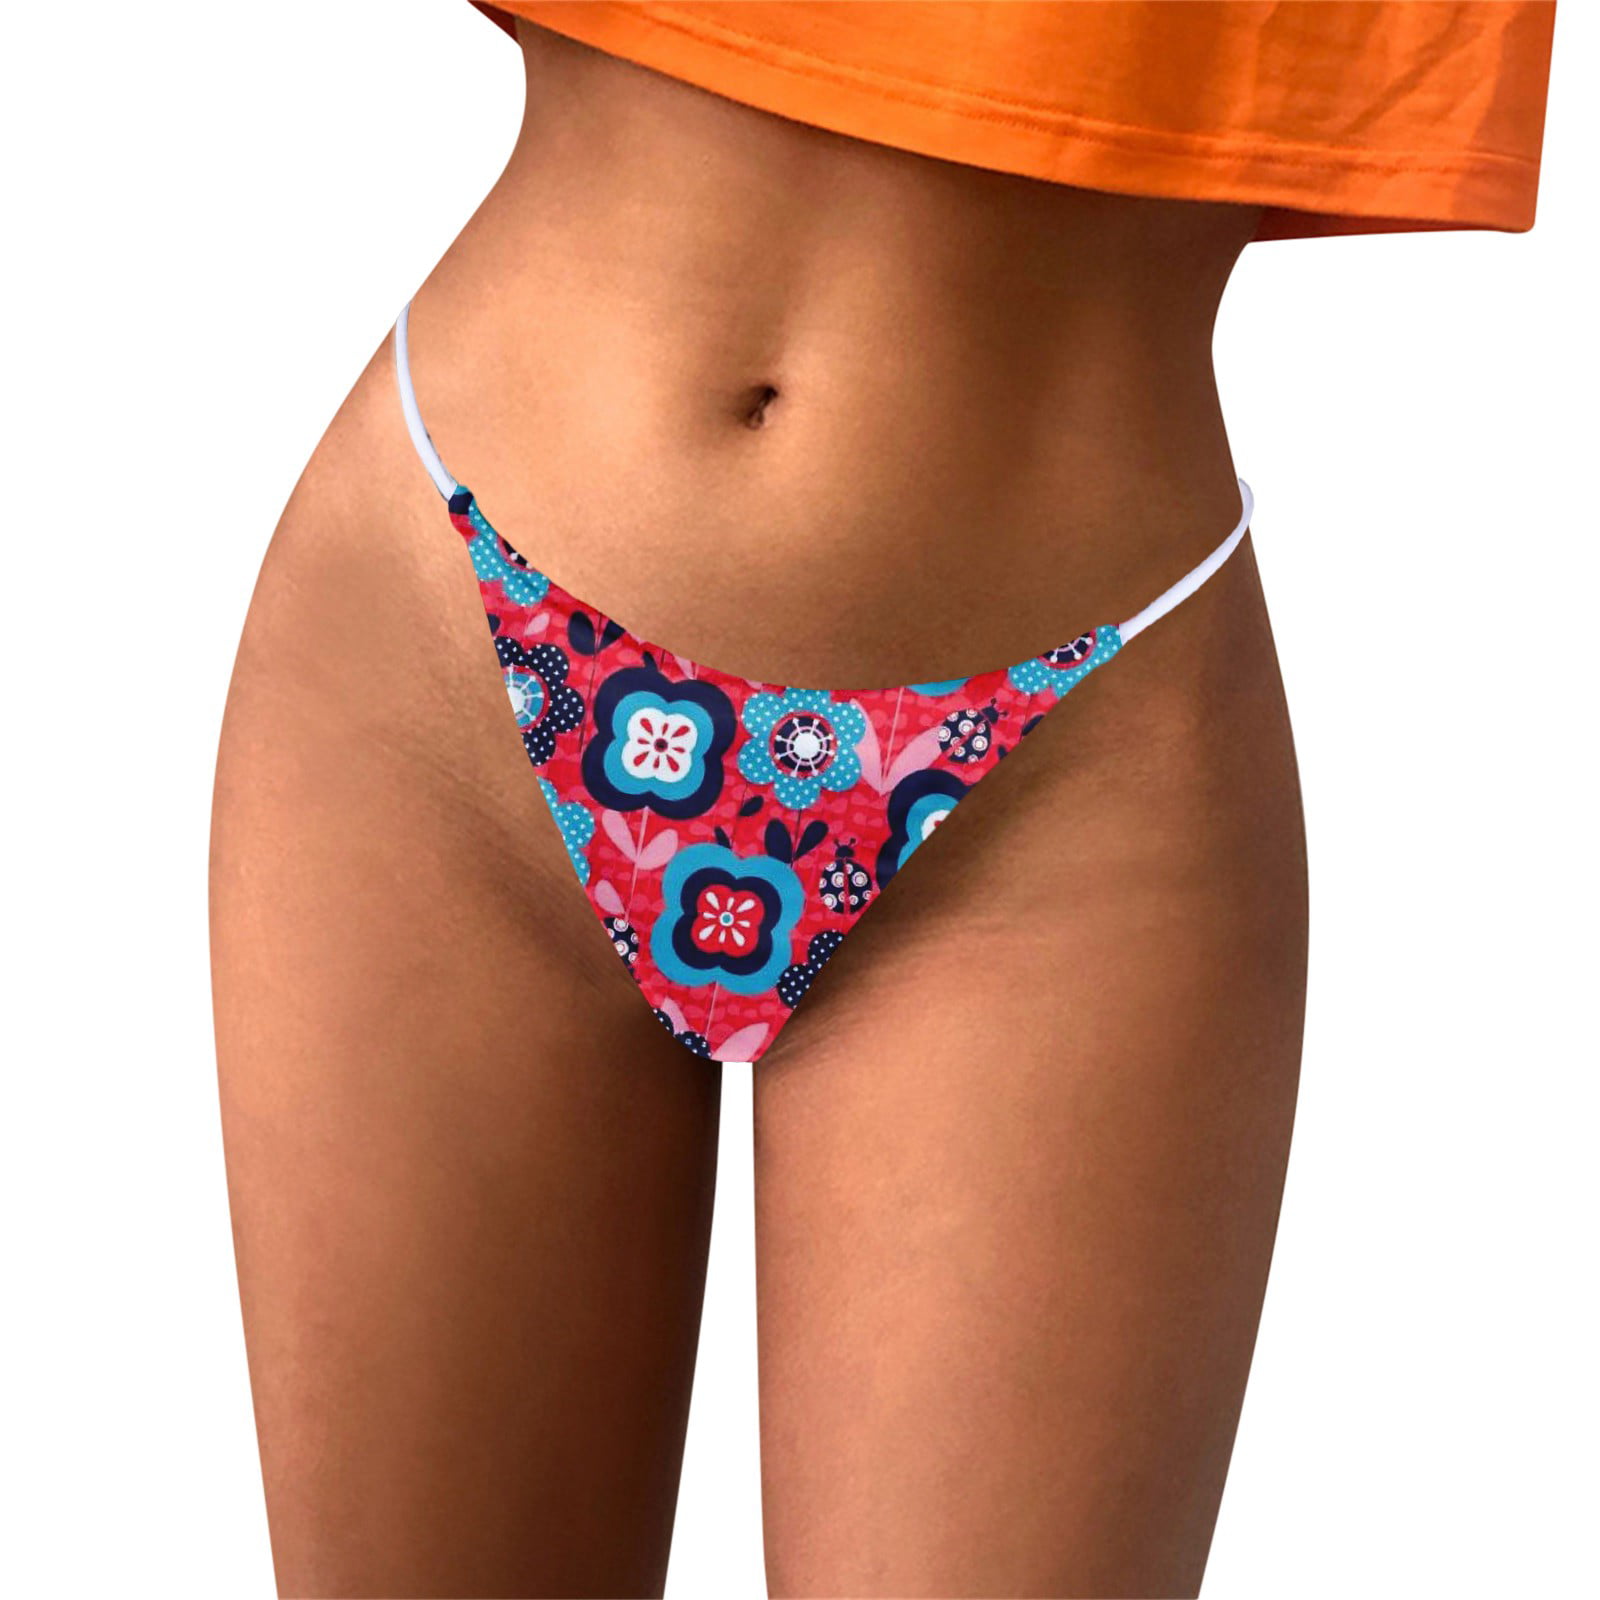 XZHGS Graphic Prints Winter Hipster G String Printed Panties